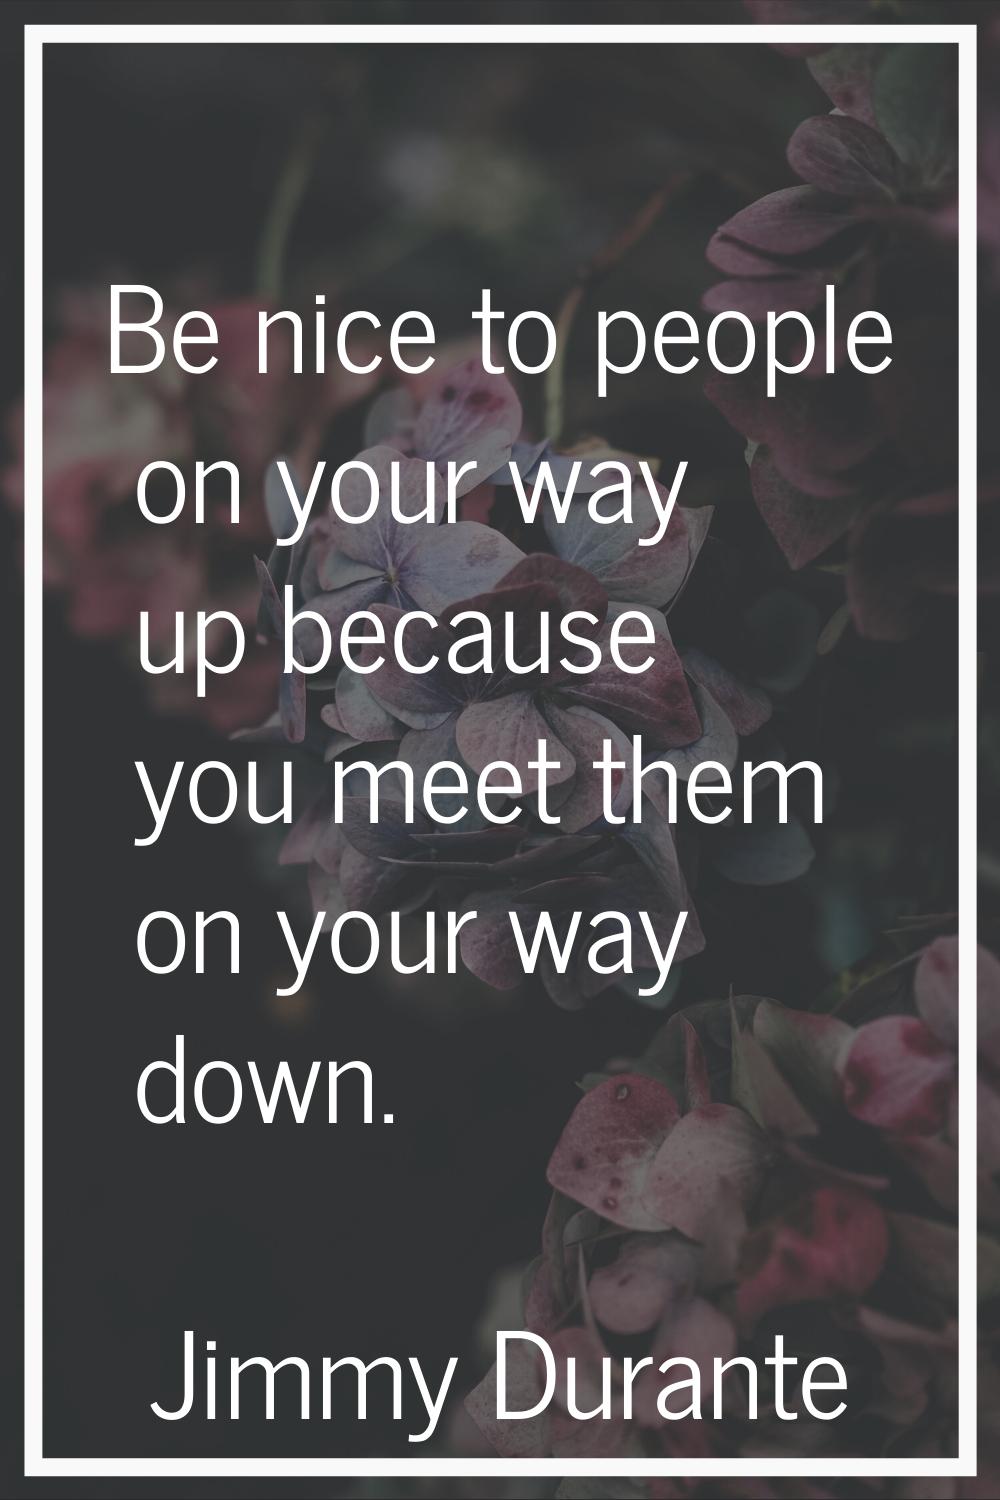 Be nice to people on your way up because you meet them on your way down.